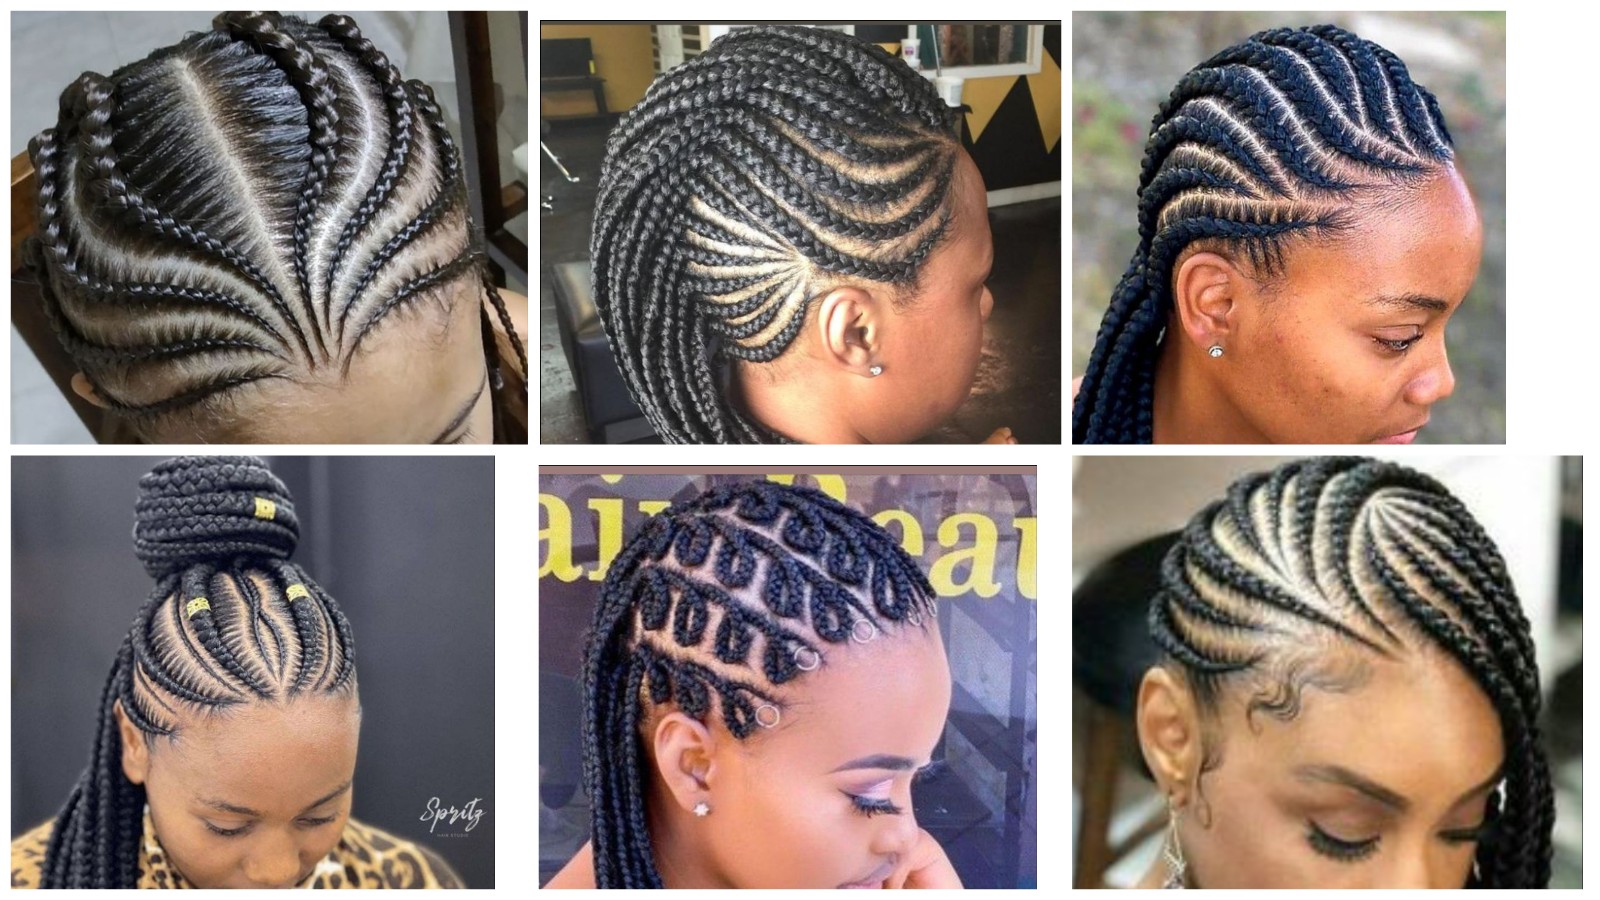 47 Braided Hairstyles That Will Make You Feel Confident